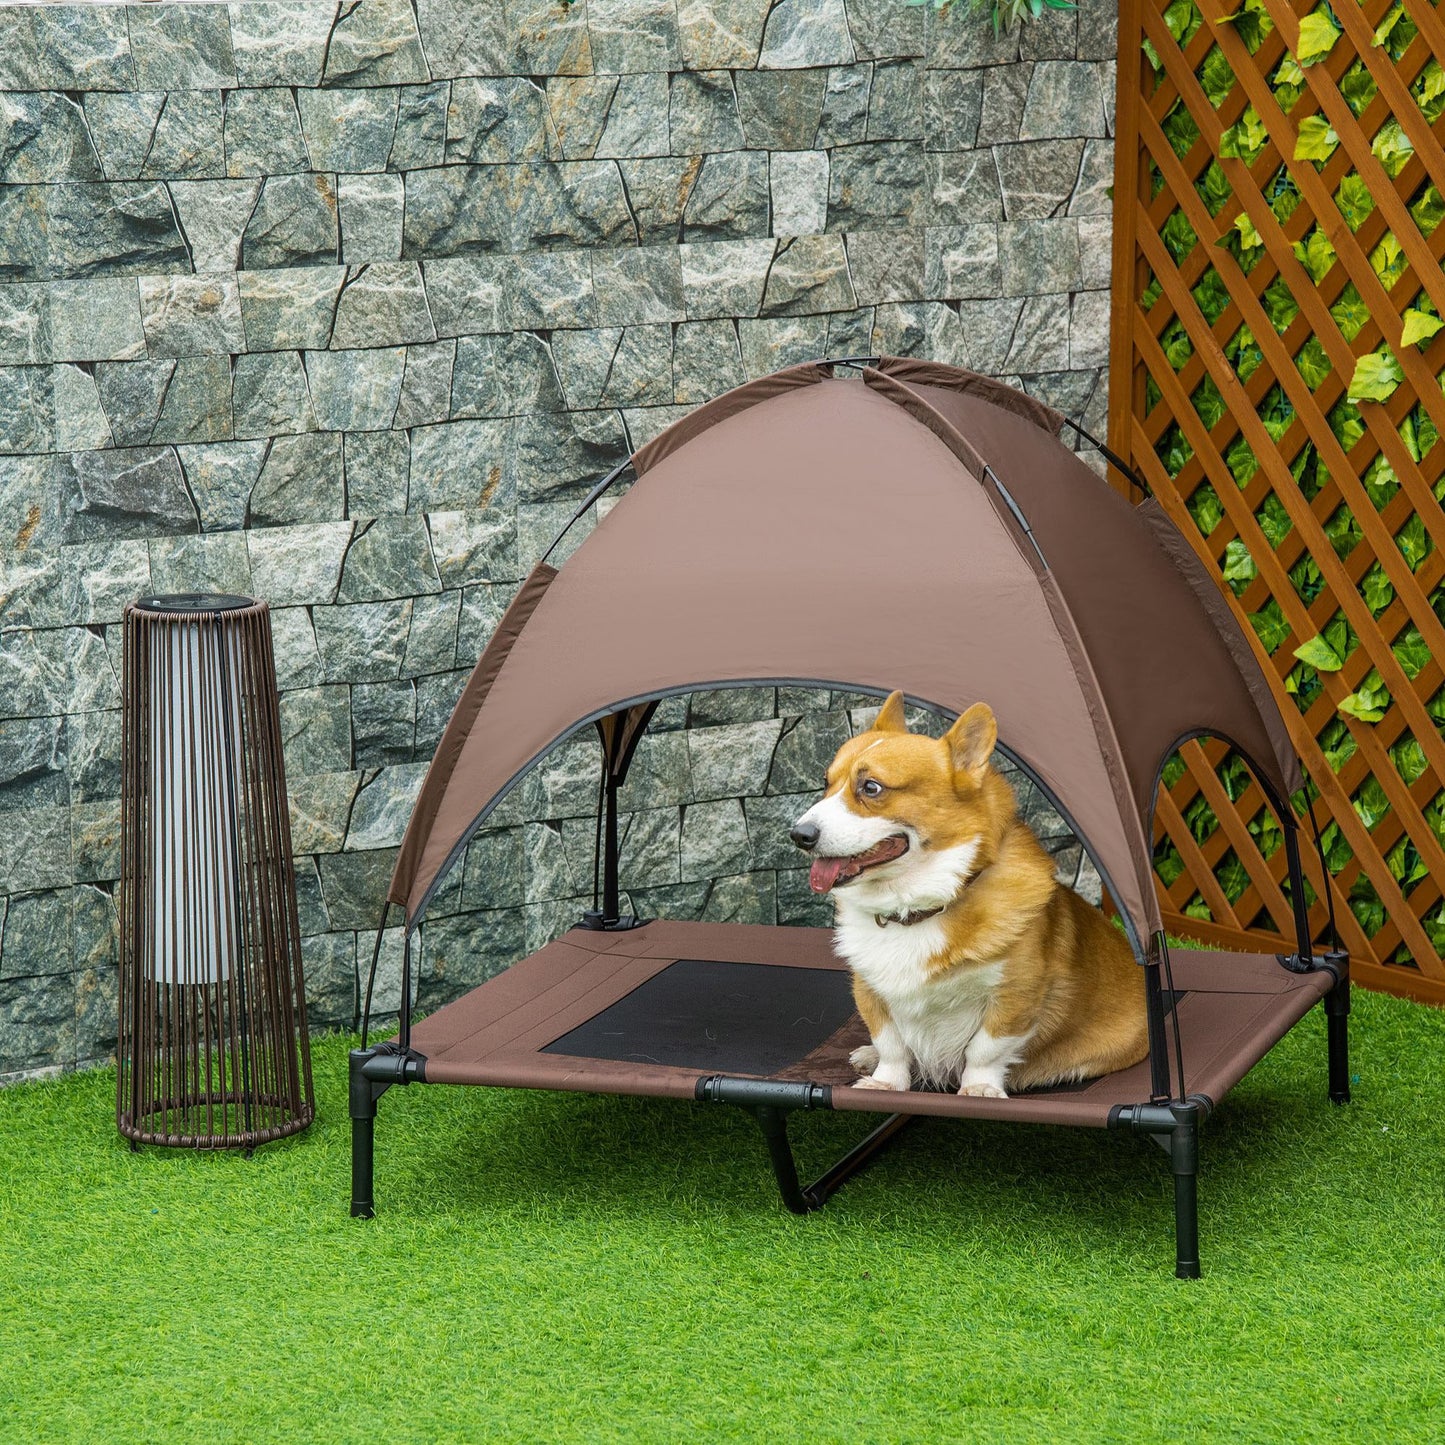 -PawHut Elevated Portable Dog Cot Pet Bed with UV Protection Canopy Shade, 36 inch, Coffee - Outdoor Style Company